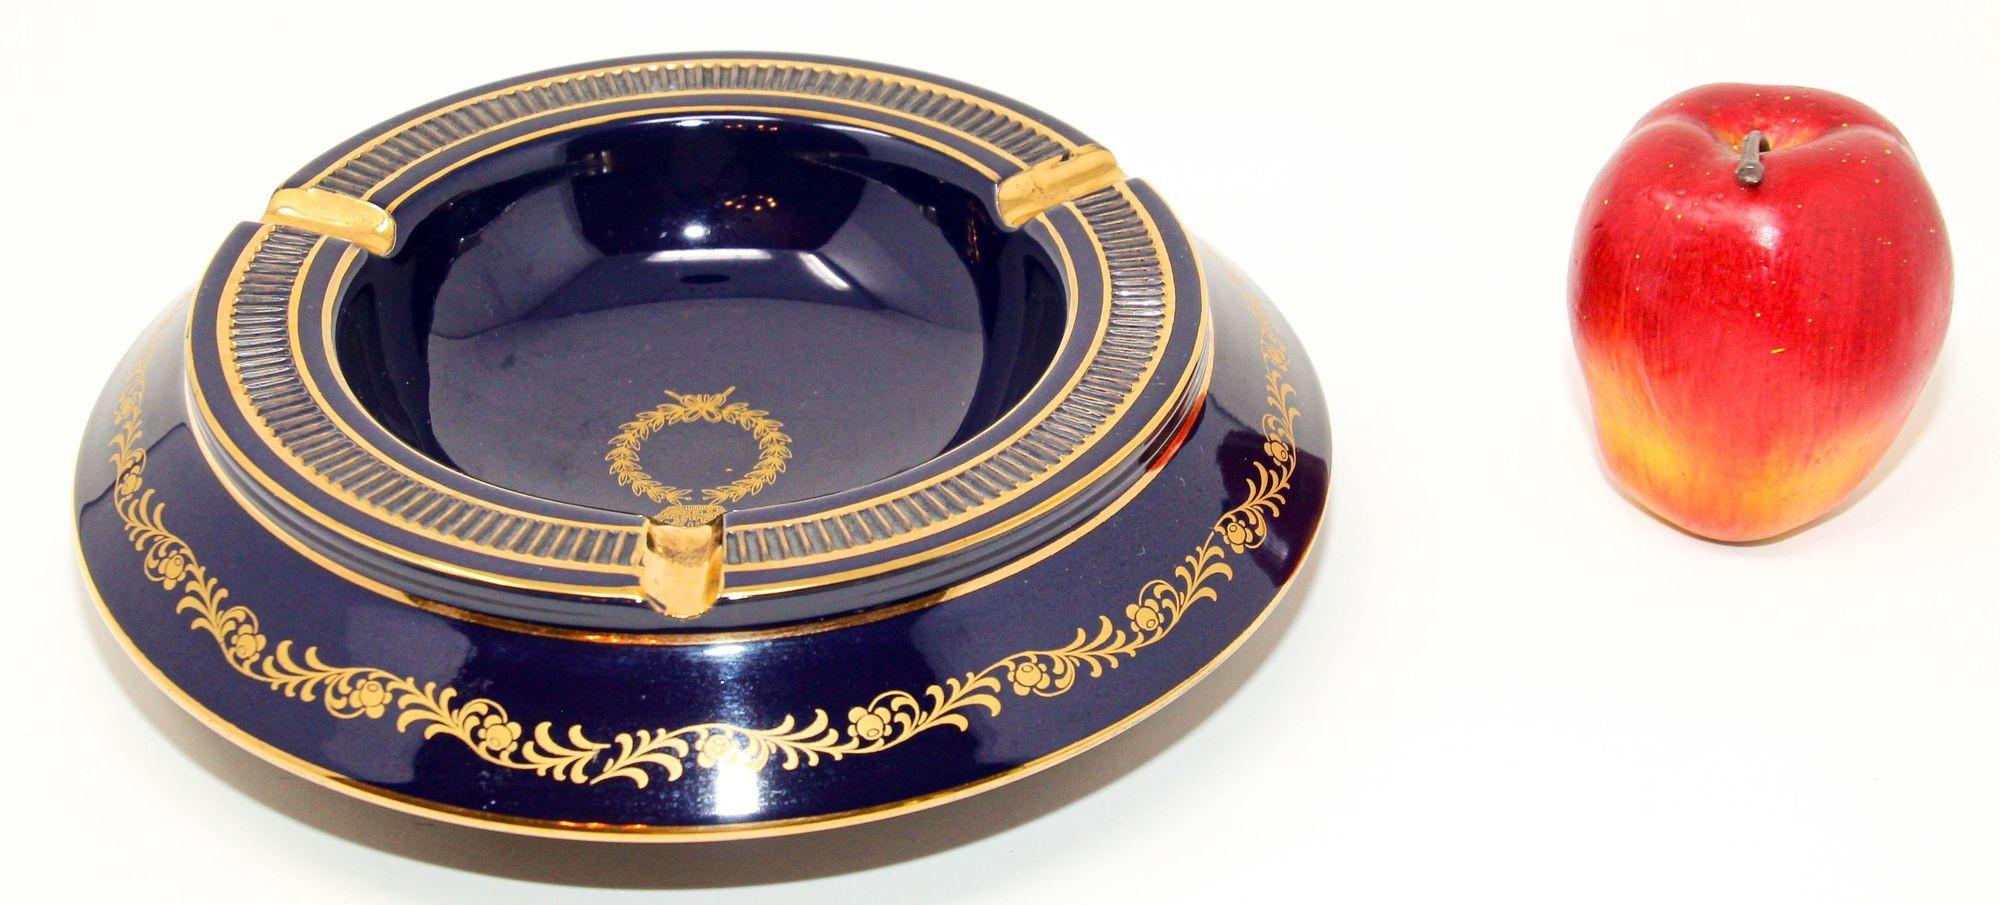 Vintage Italian Florentine Cobalt Blue and Gold Large Footed Ashtray For Sale 3